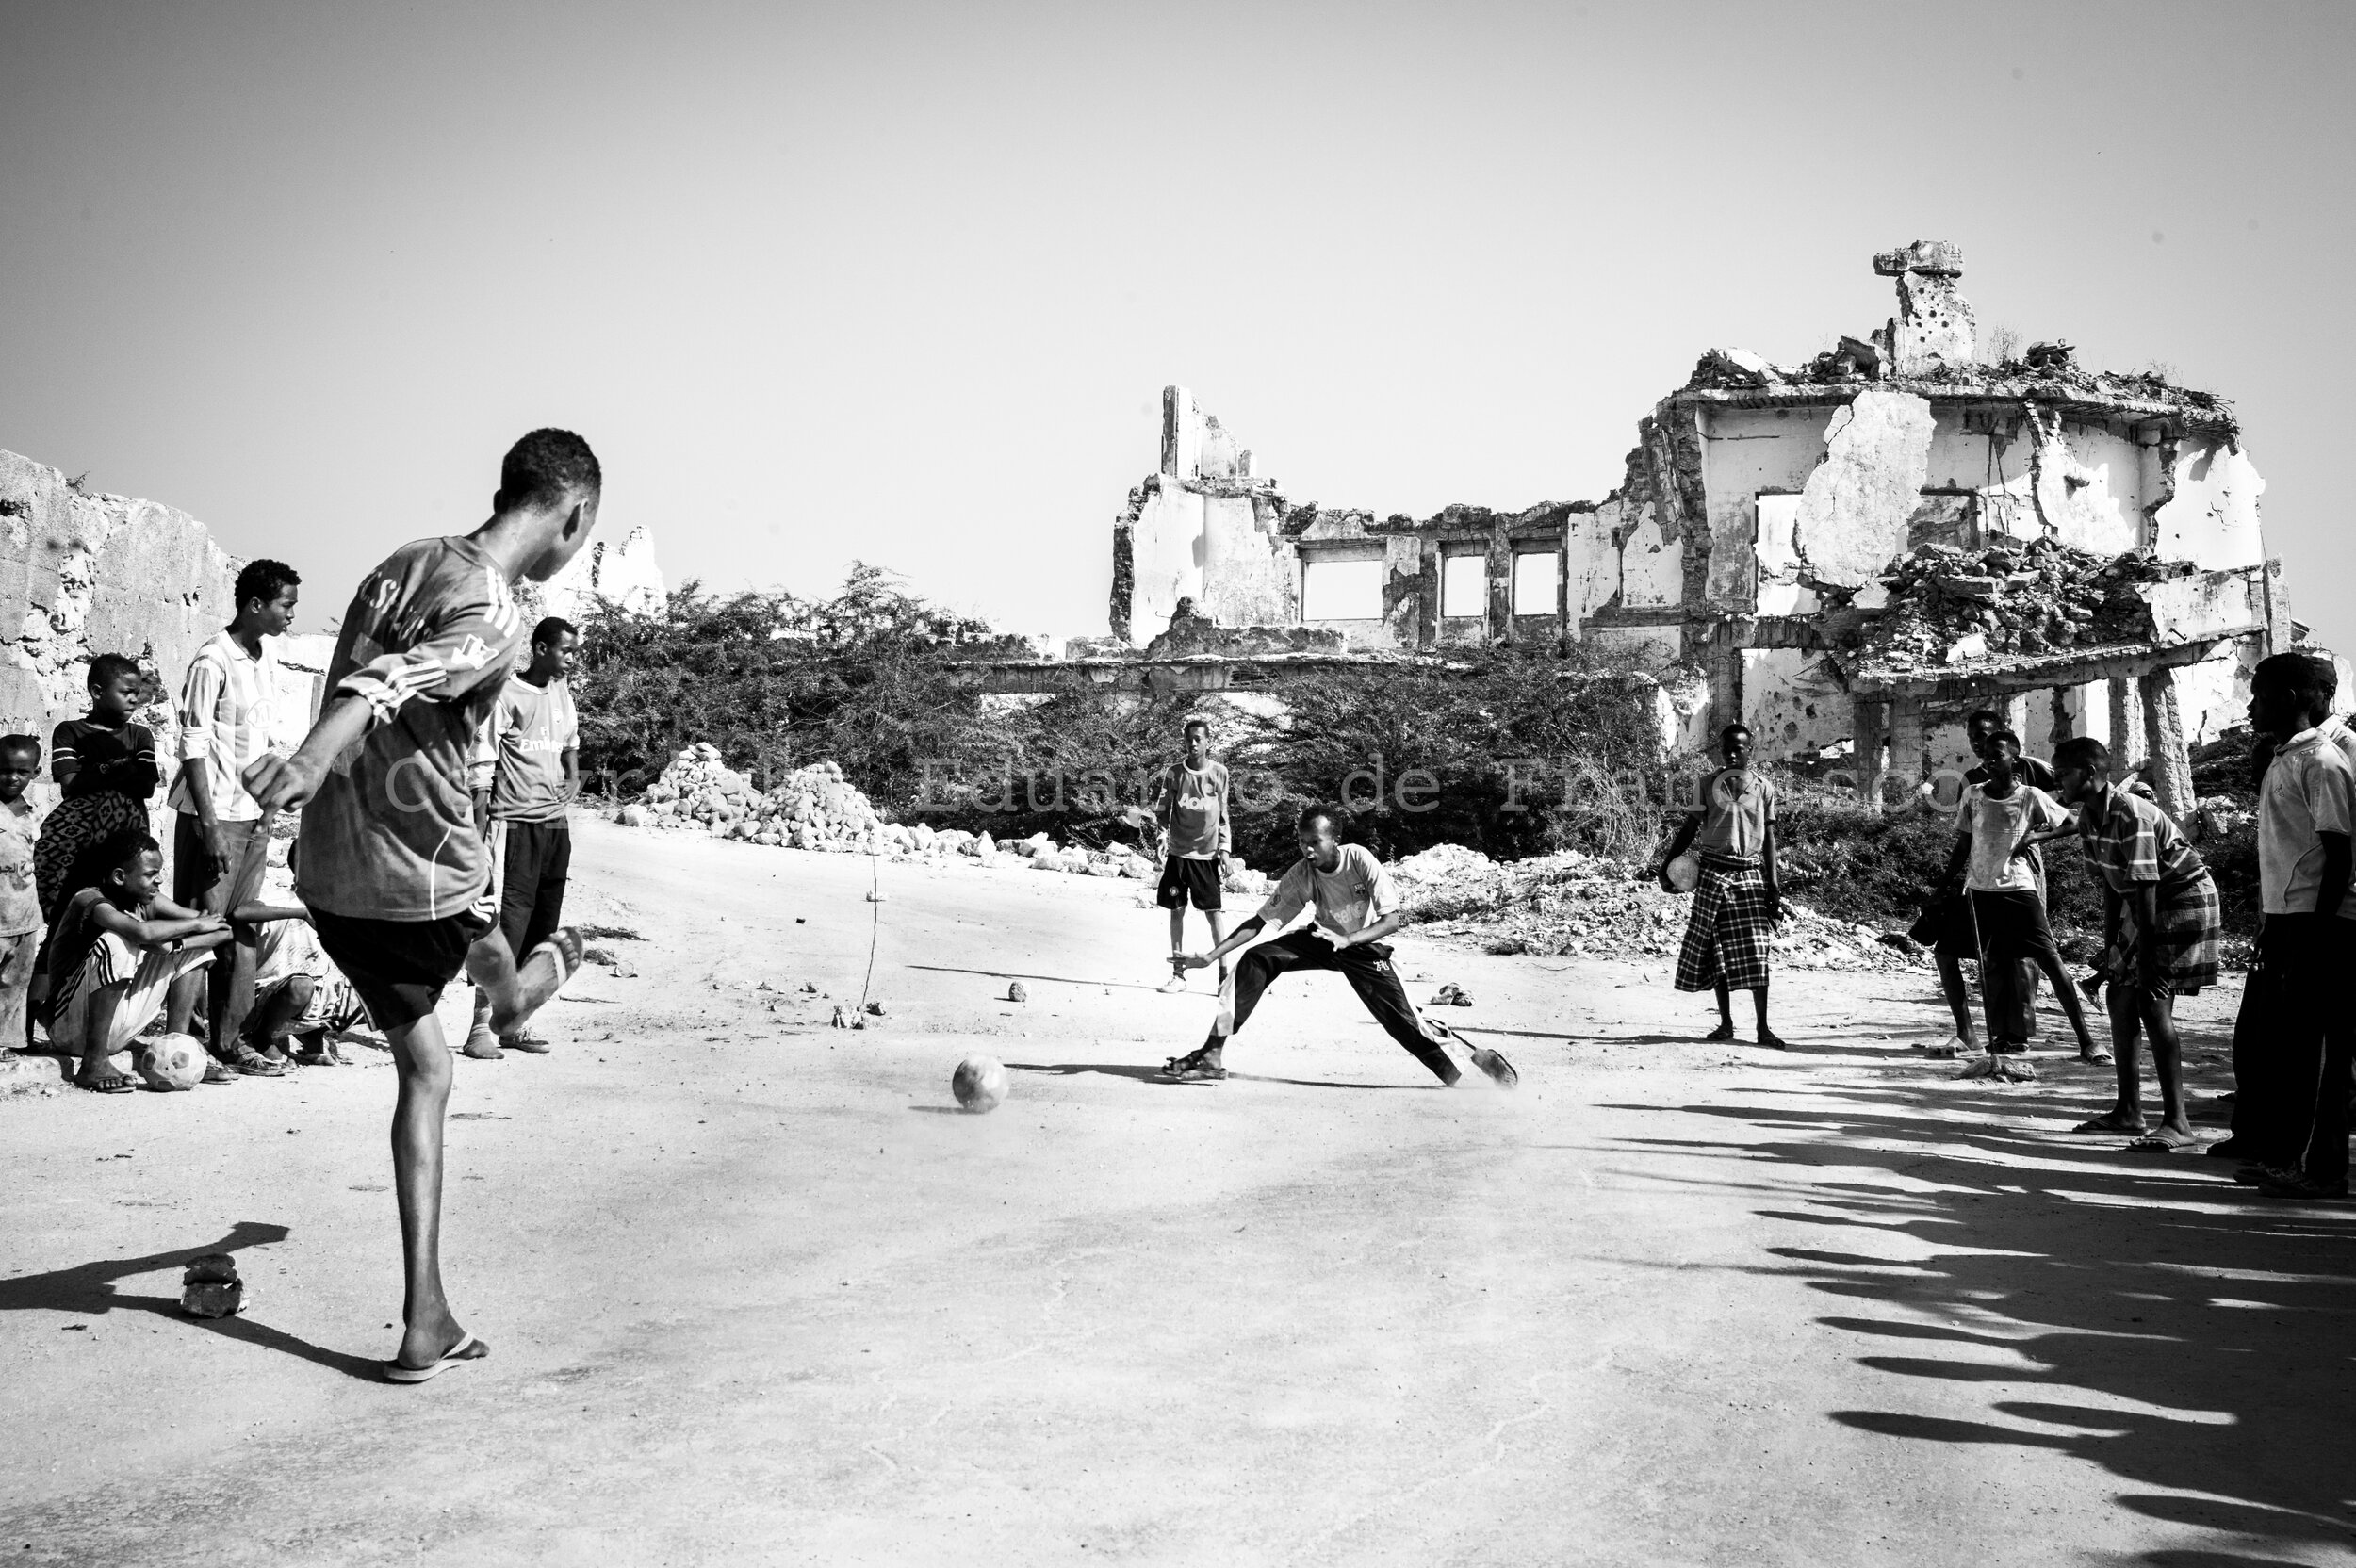  Boys playing football in the streets of Mogadishu. 